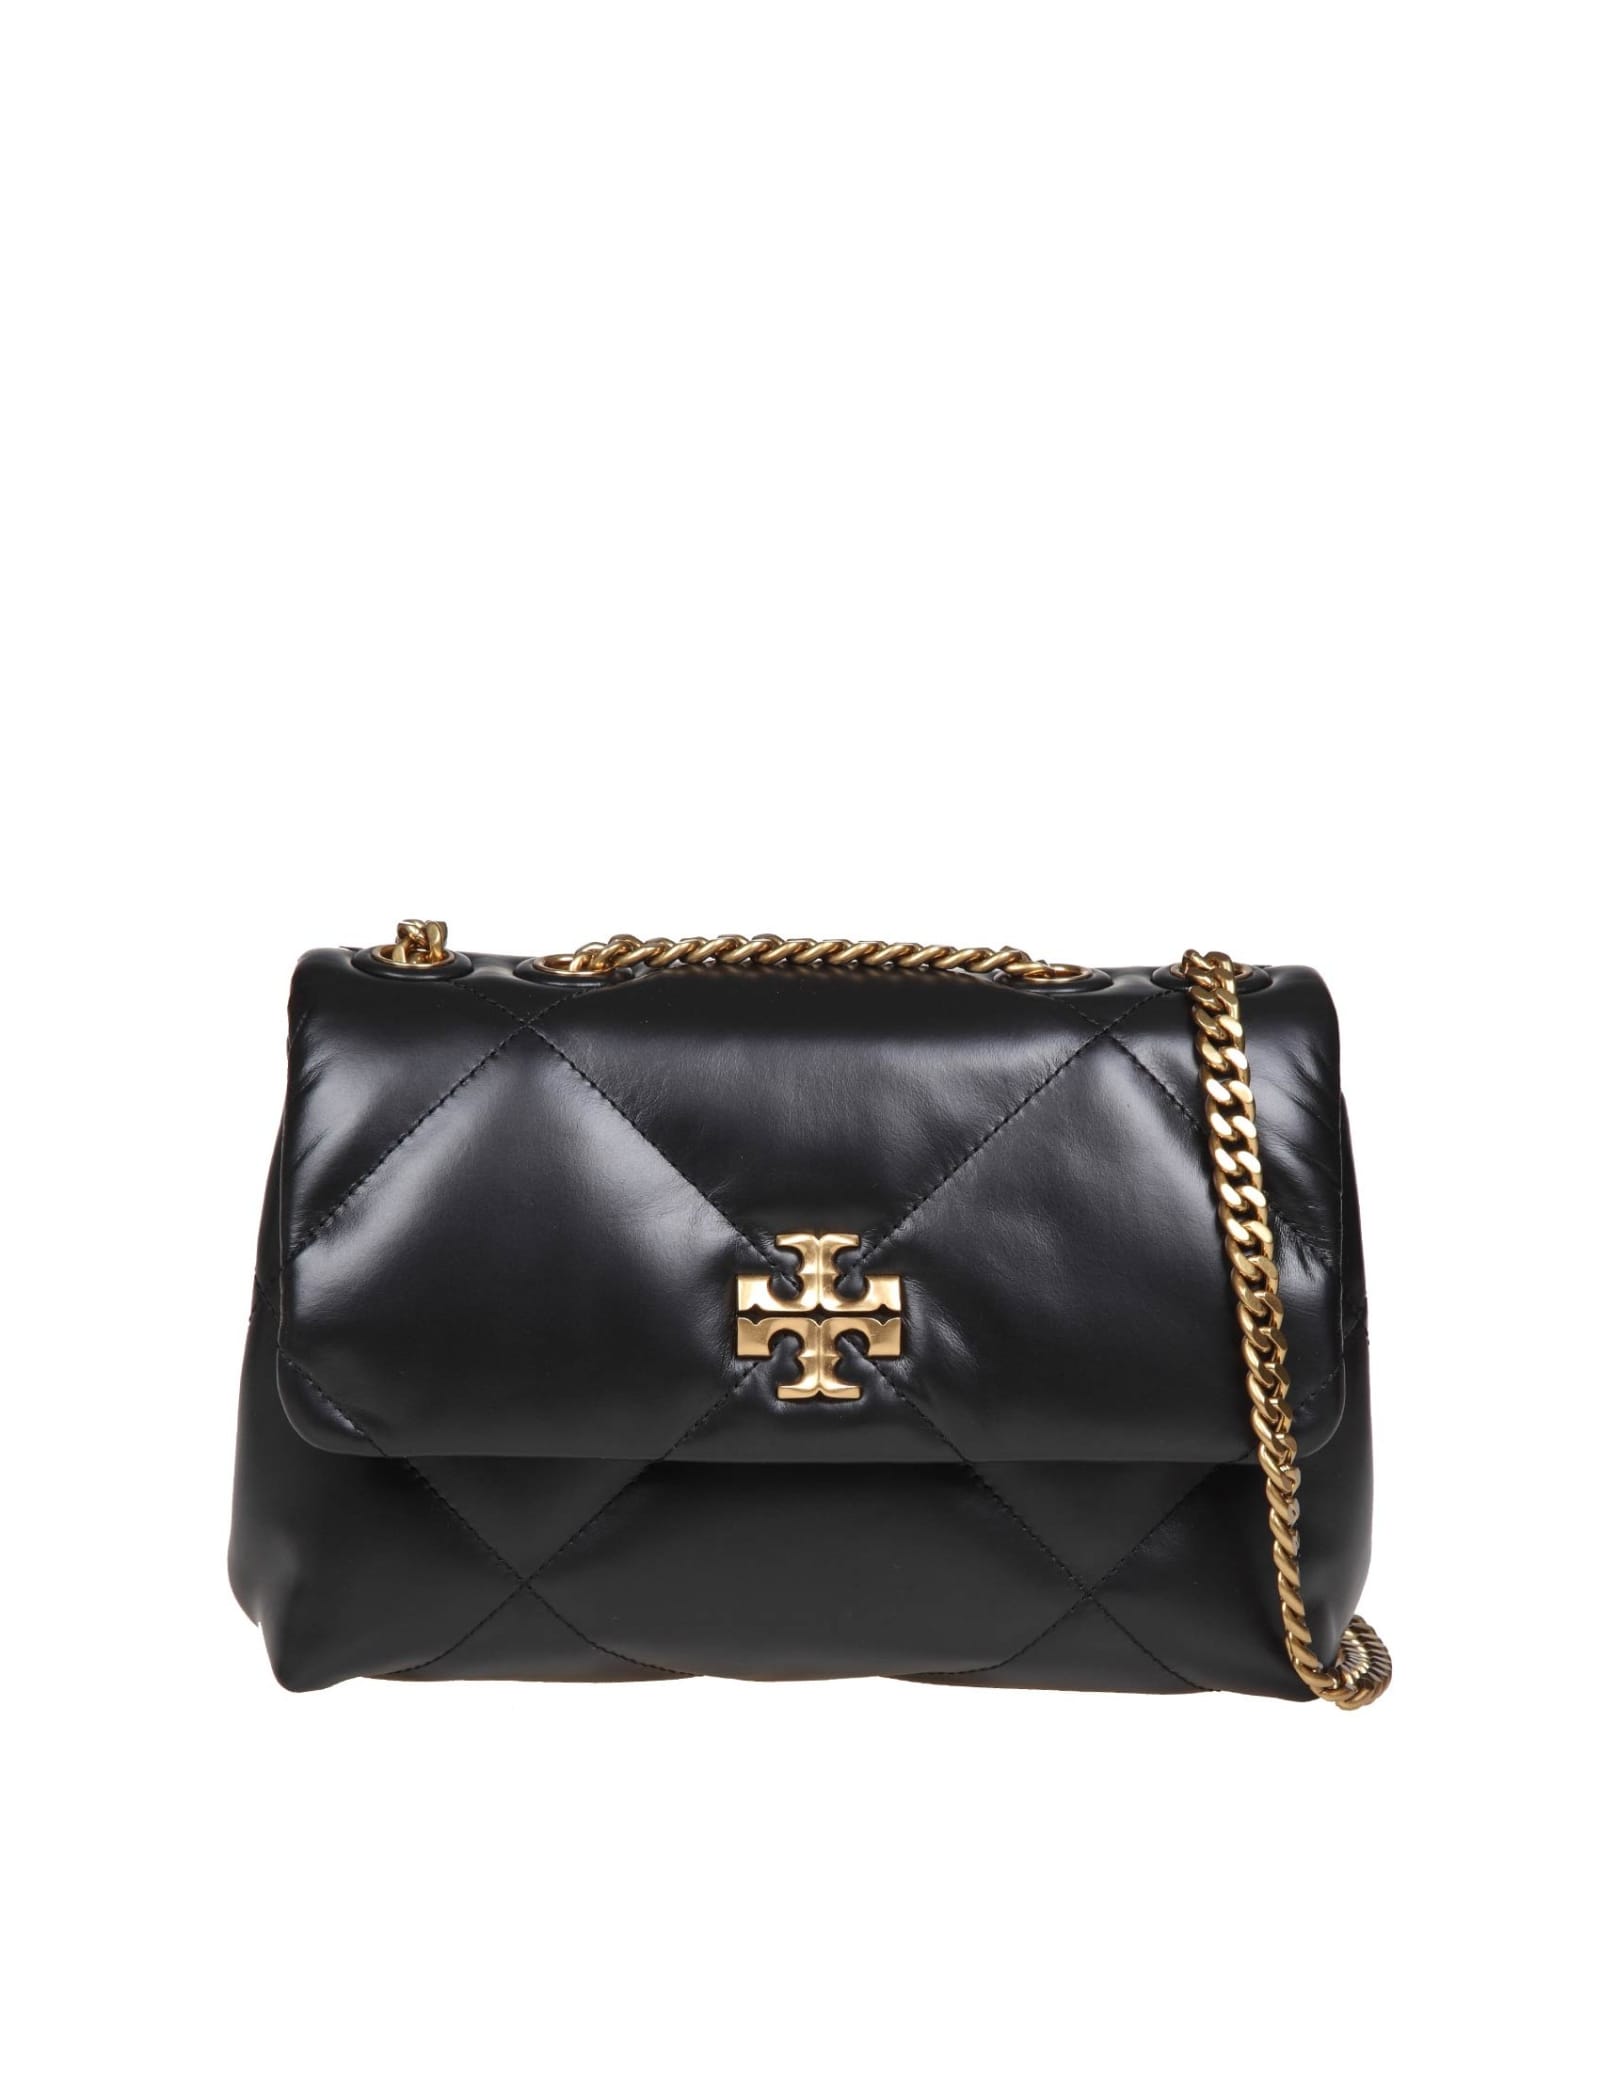 Tory Burch Kira Small Diamond Quilted Black Color